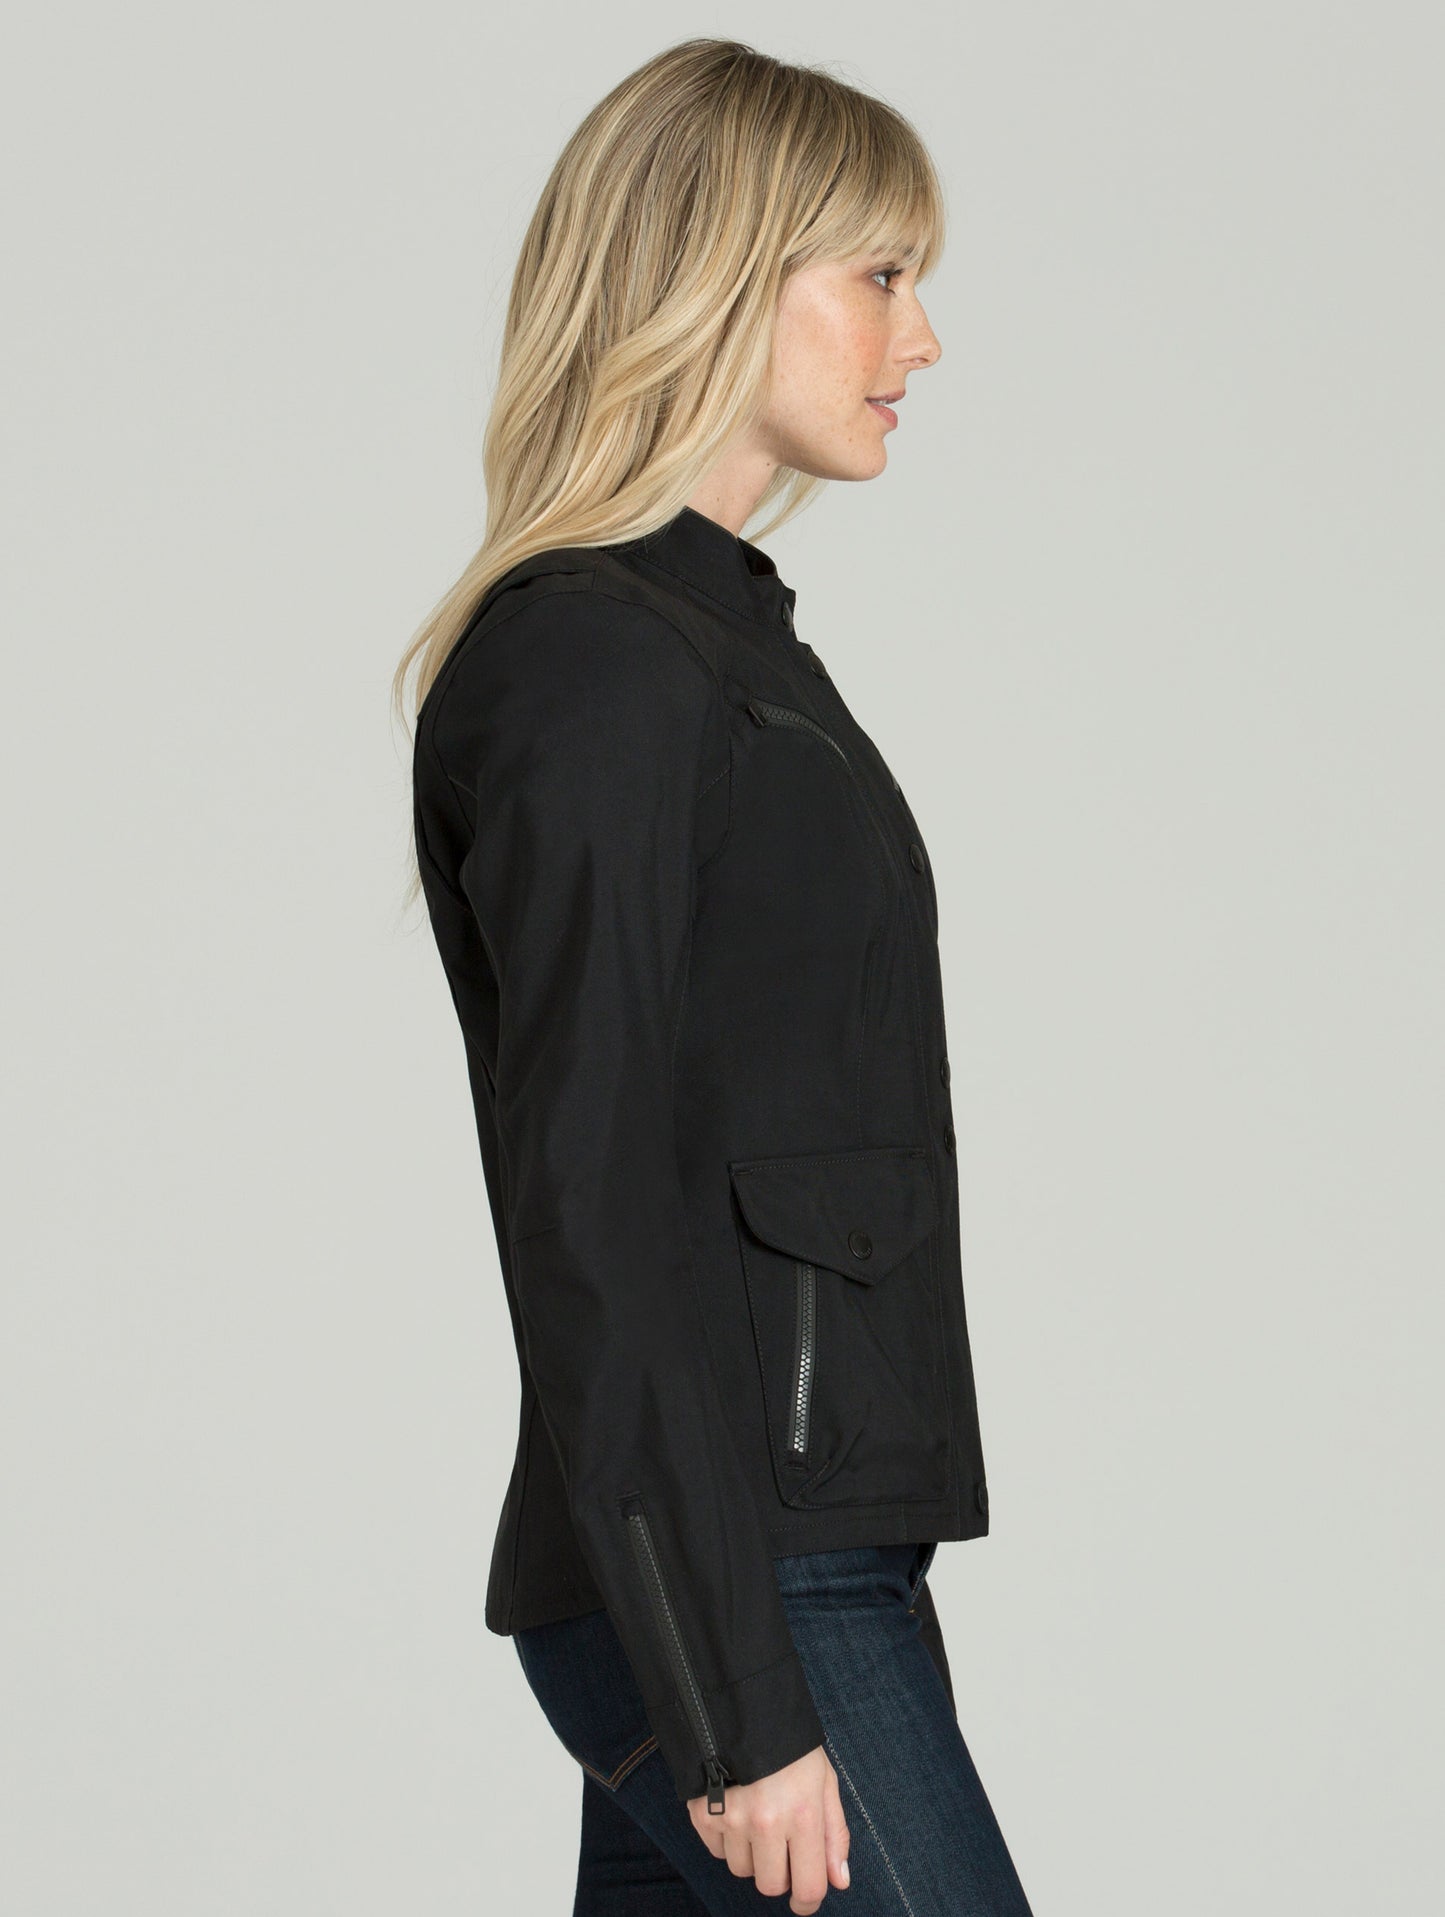 Woman wearing black Chase Motorcycle jacket from AETHER Apparel